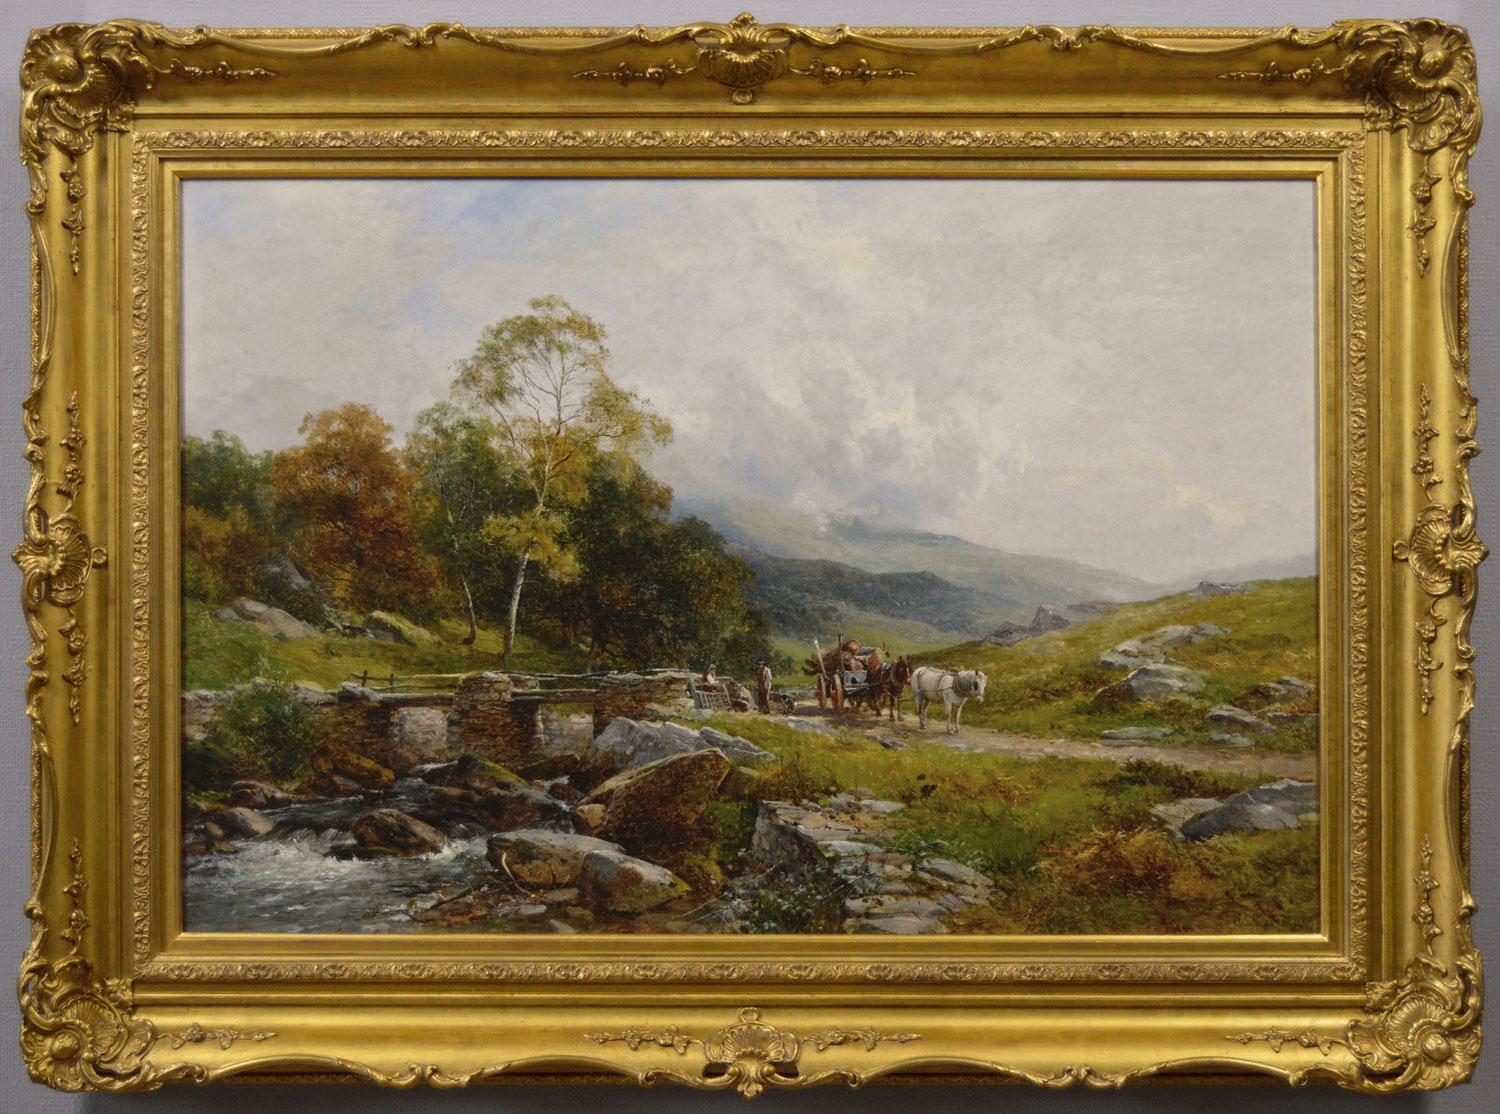 David Bates b.1840 Landscape Painting - 19th Century Welsh landscape oil painting of figures by the River Glaslyn 